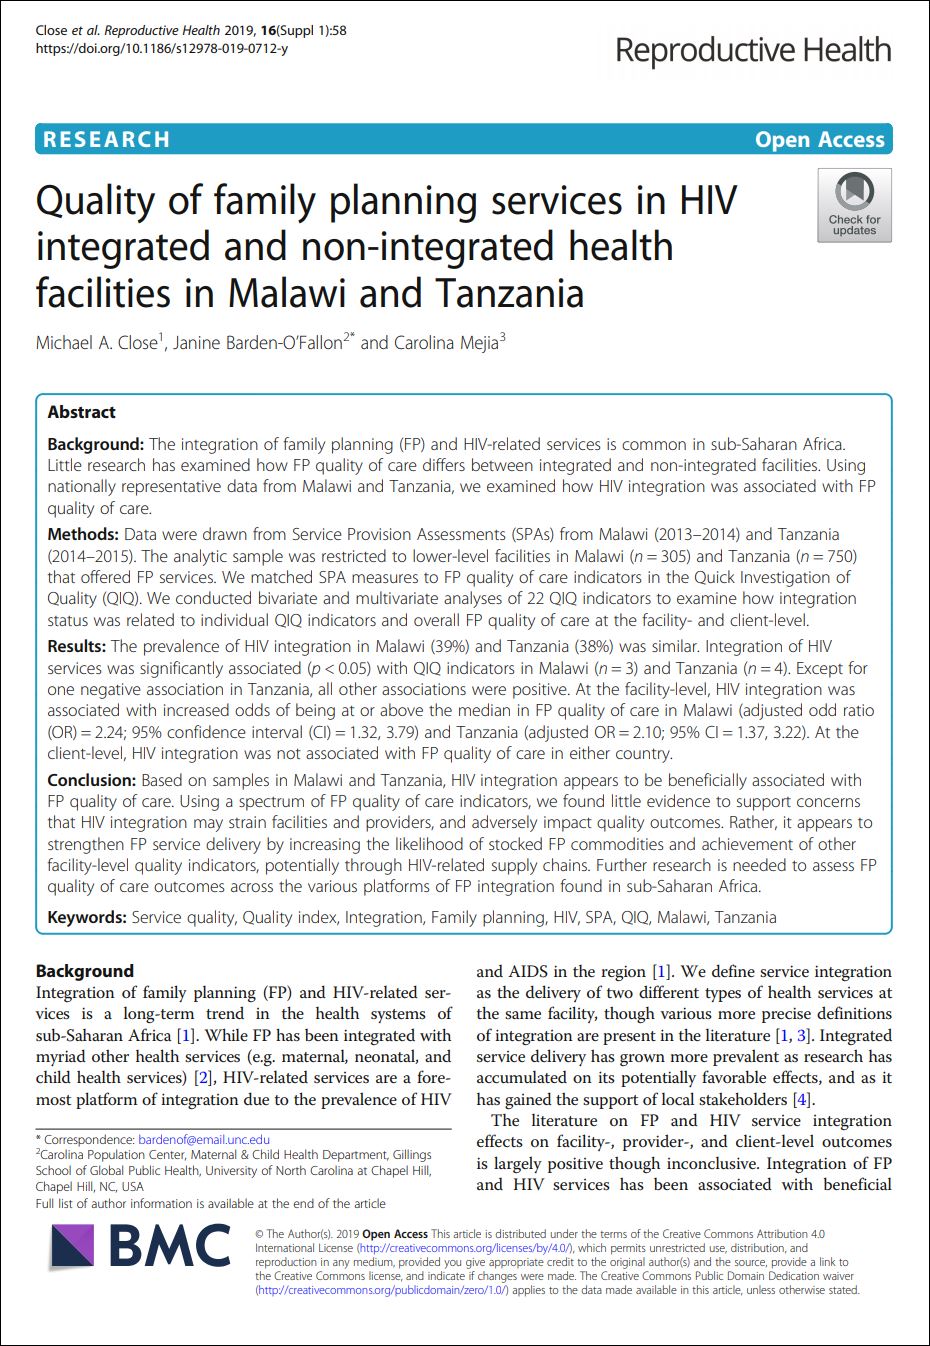 Quality of family planning services in HIV integrated and non-integrated health facilities in Malawi and Tanzania